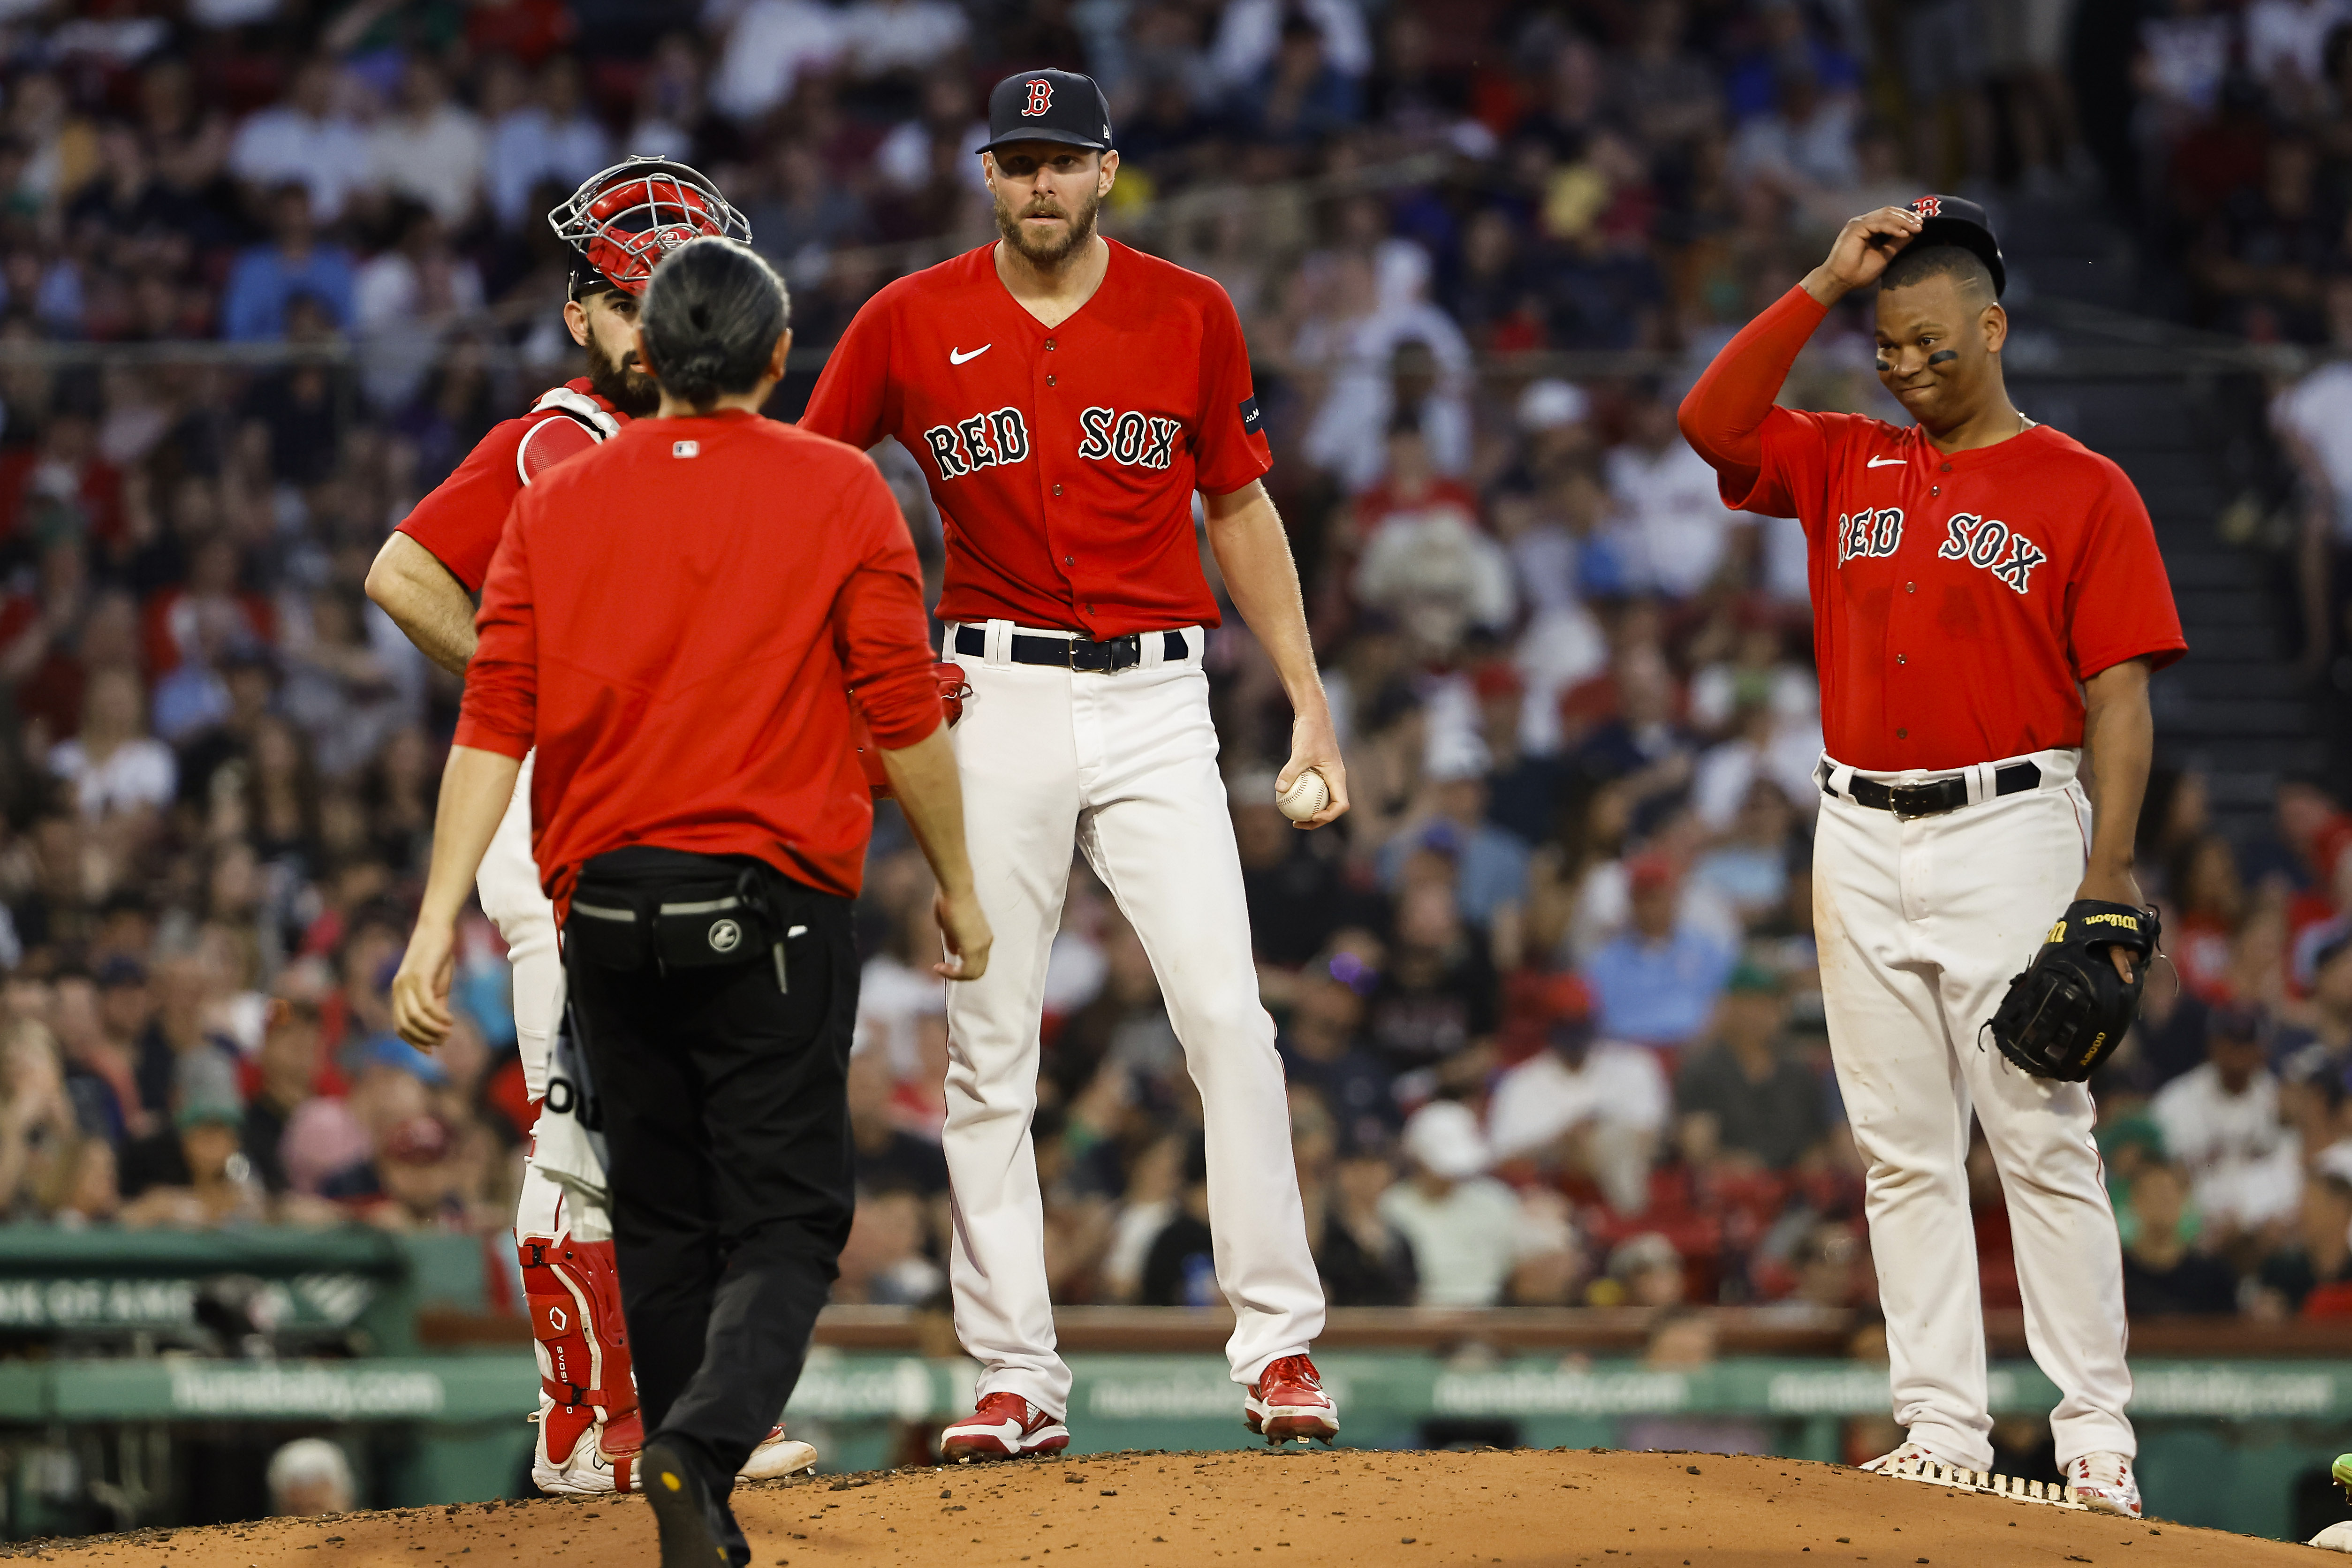 Chris Sale injury: Red Sox lefty leaves game with left shoulder